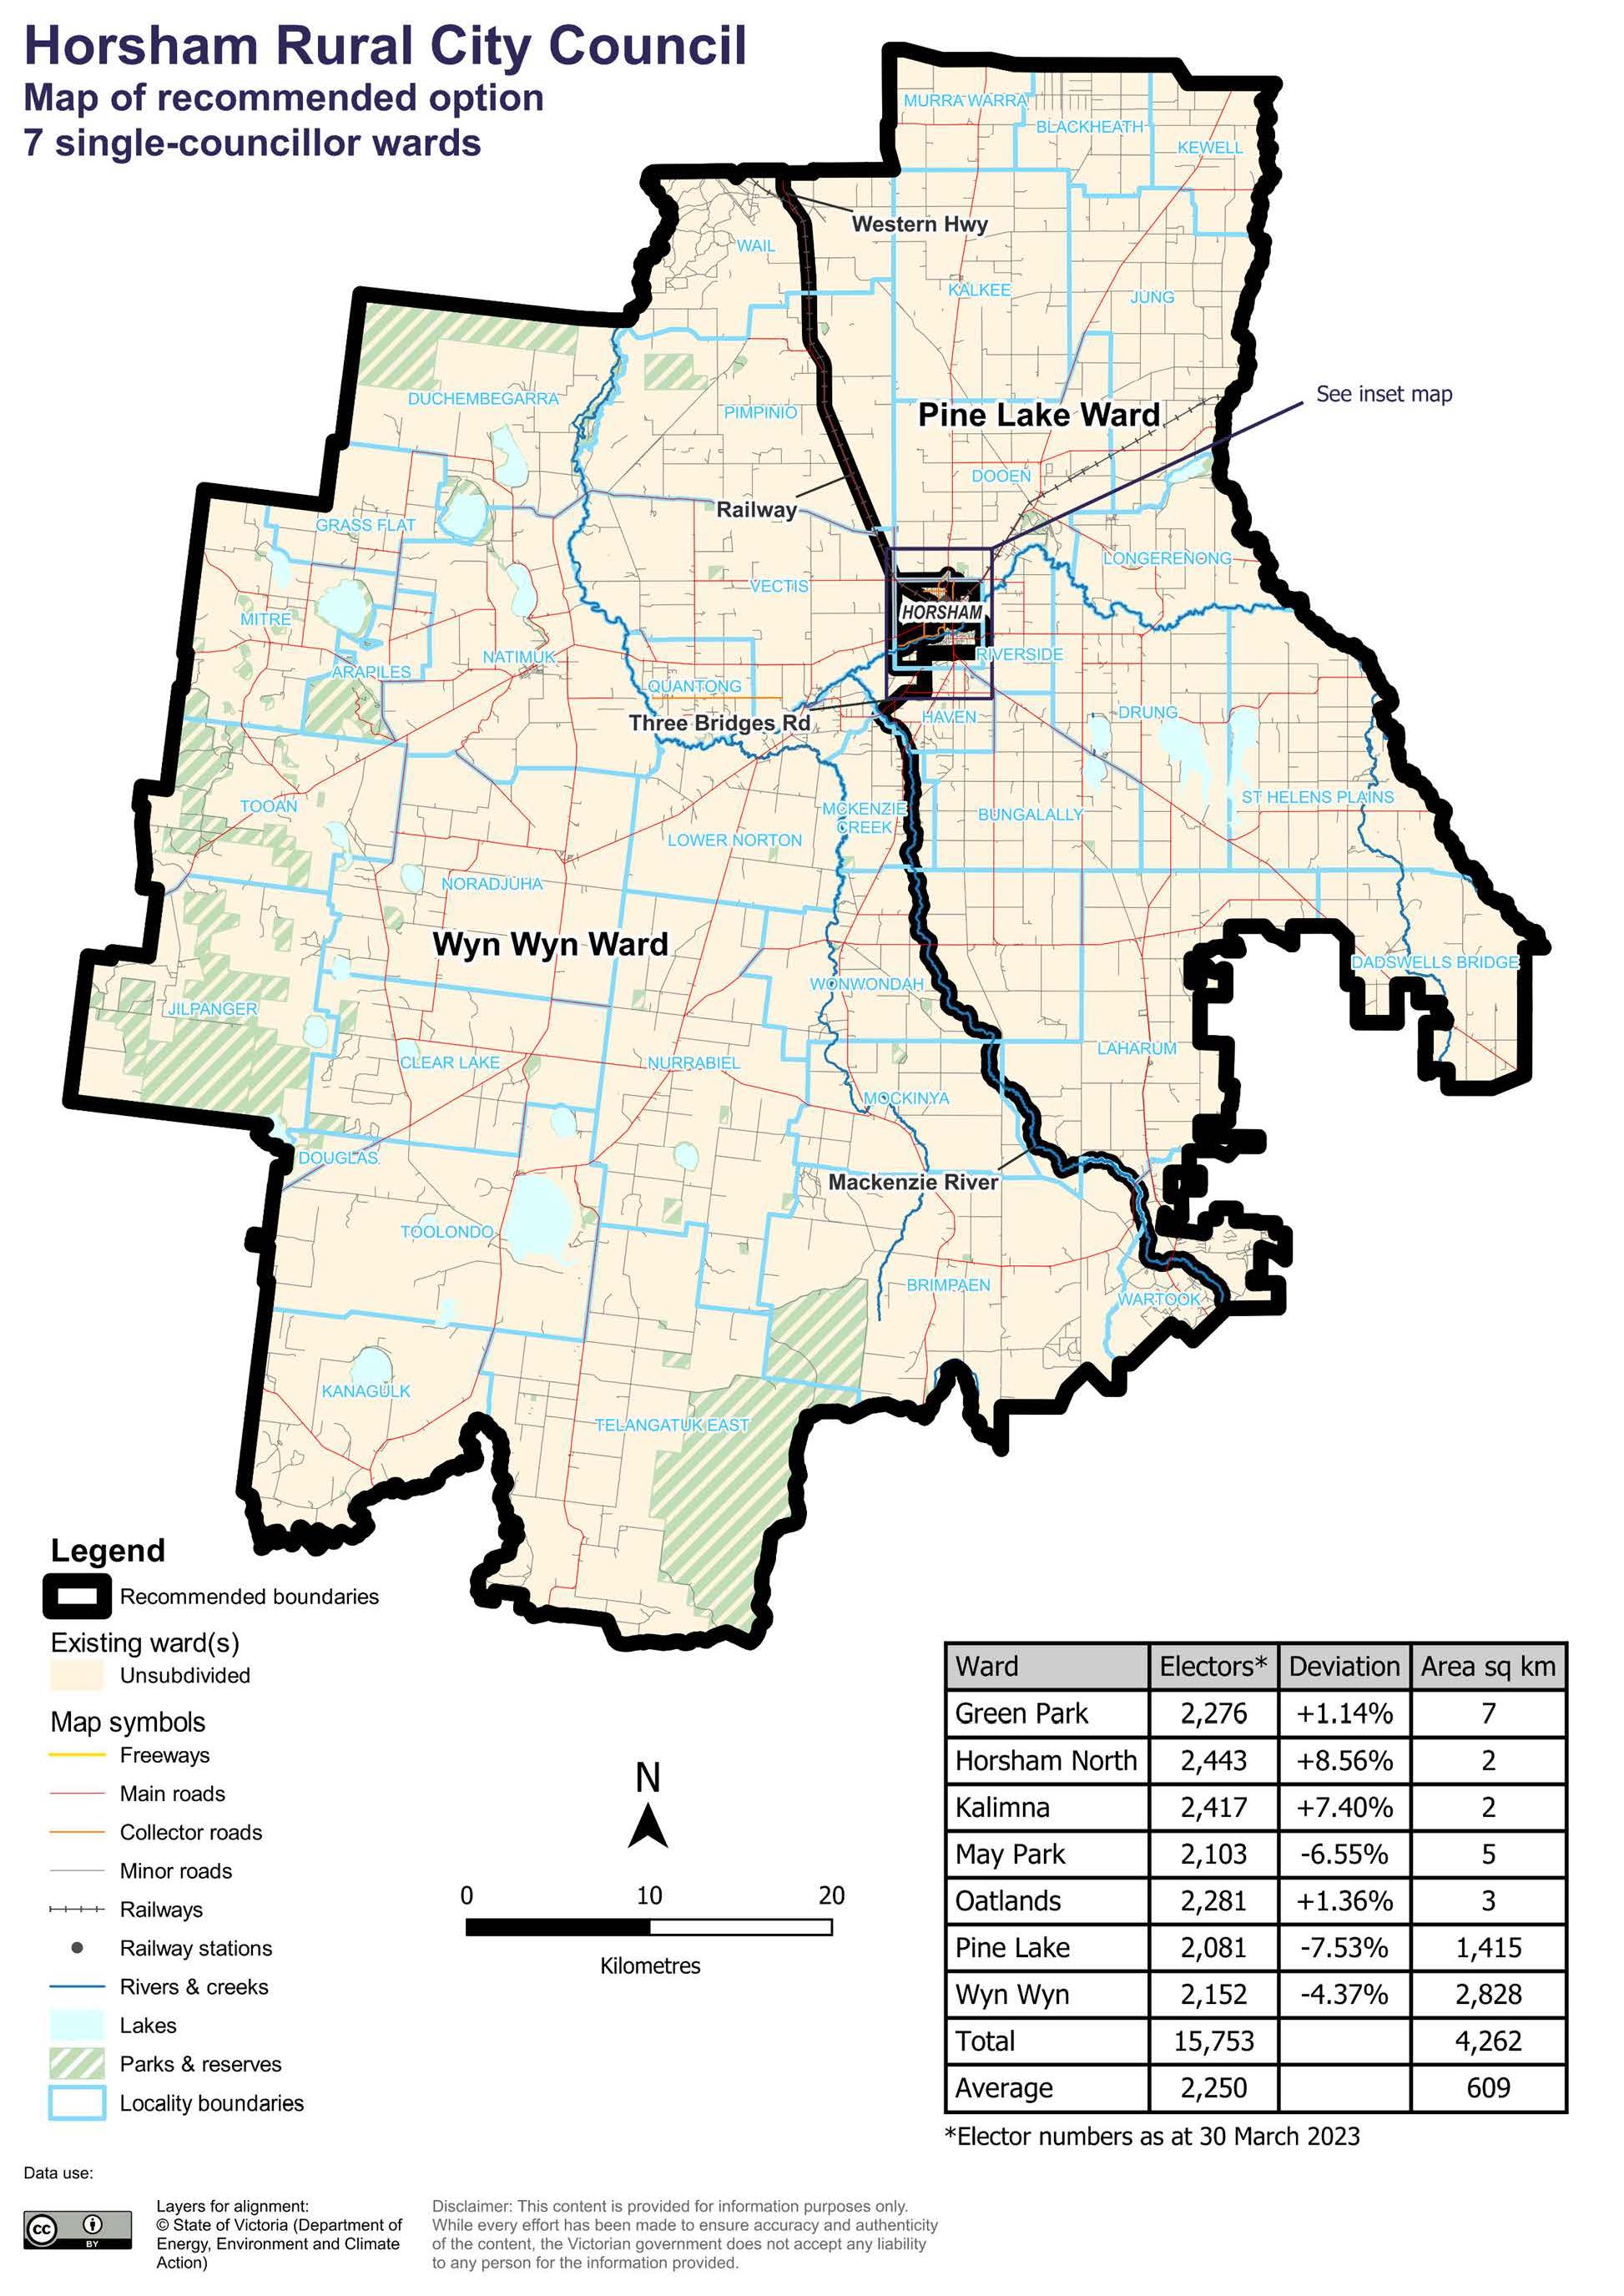 Horsham-Rural-City-Council-electoral-structure-review-Final-report-August-2023_Page_24_Image_0001.jpg